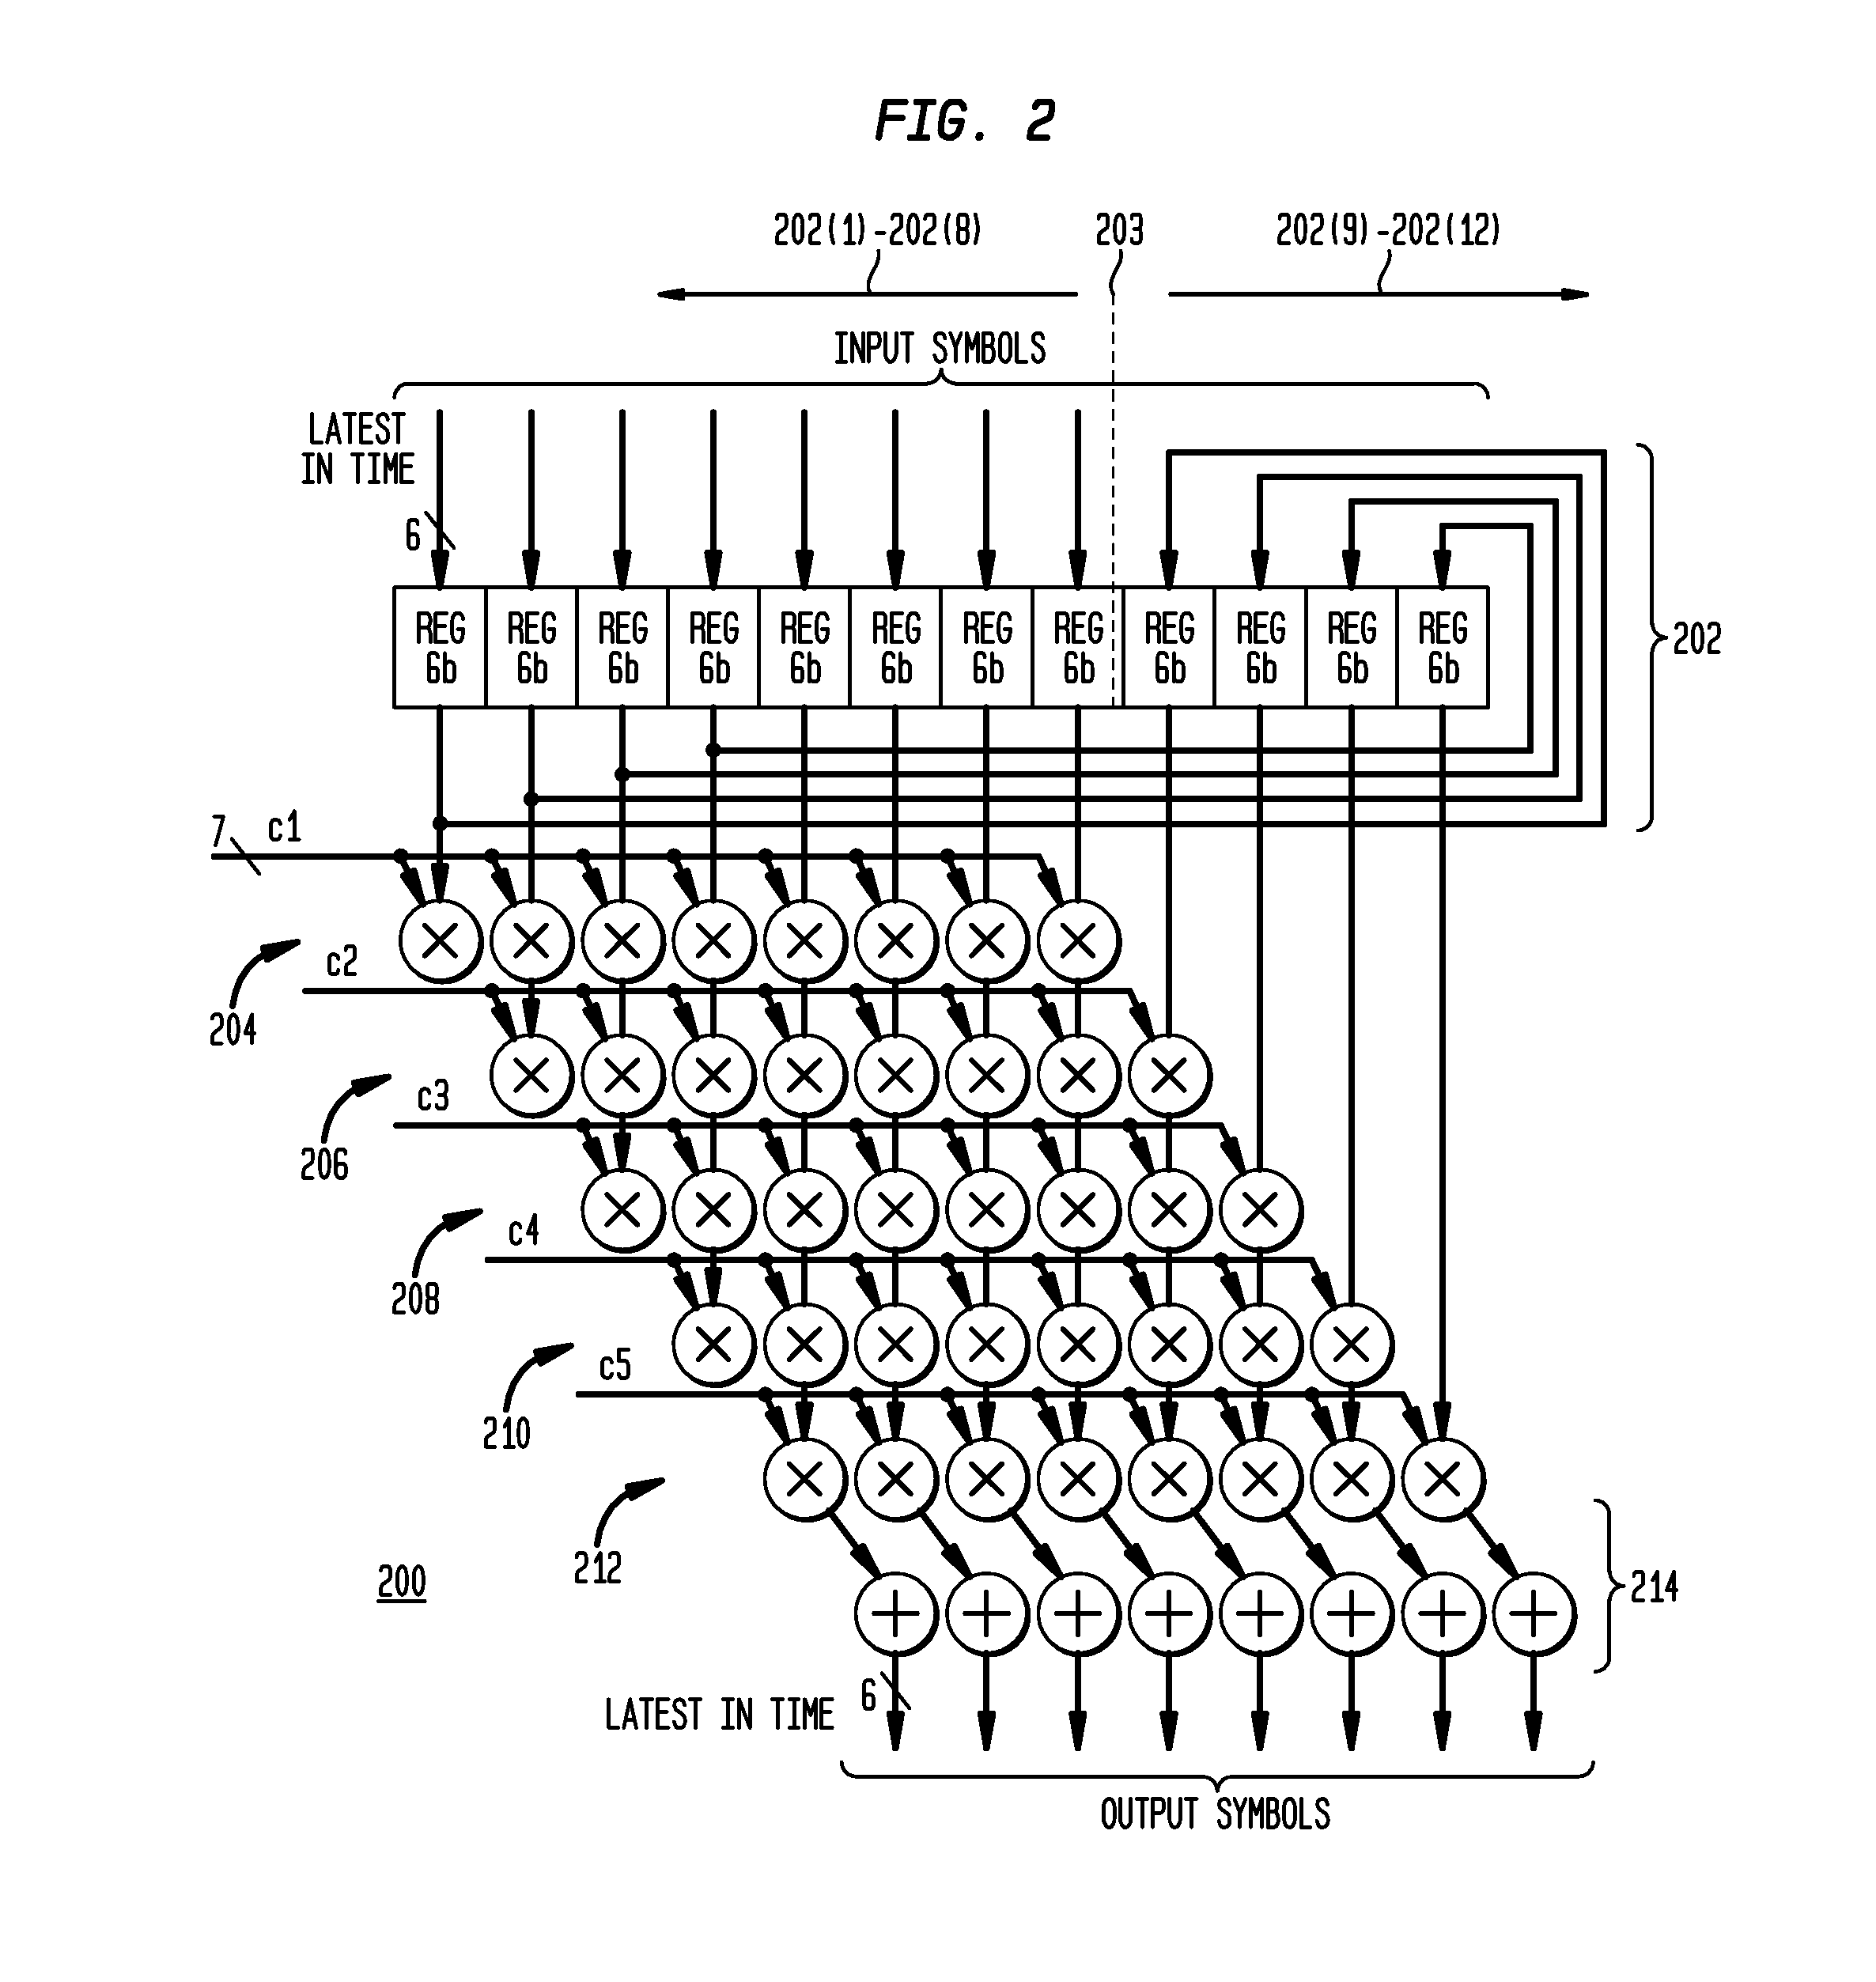 Sparse and reconfigurable floating tap feed forward equalization